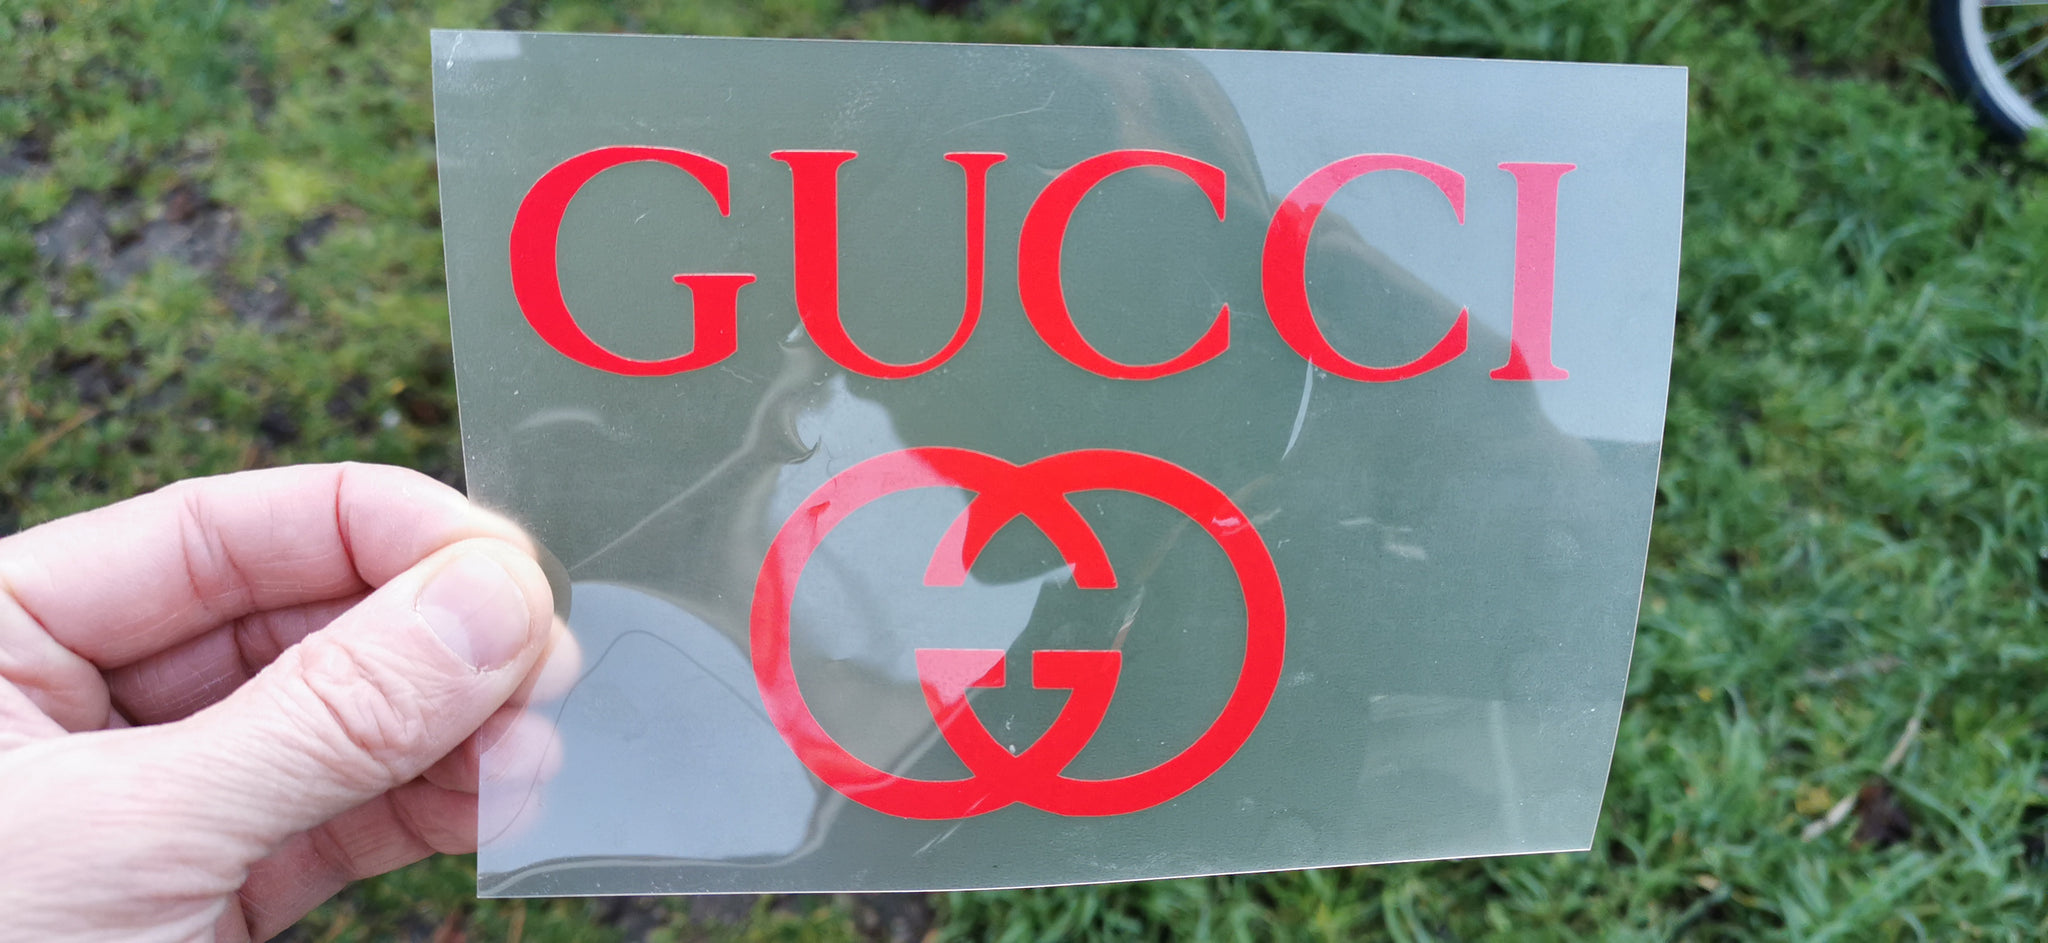 GUCCI Mickey Mouse T Shirt Heat Iron on Transfer Decal